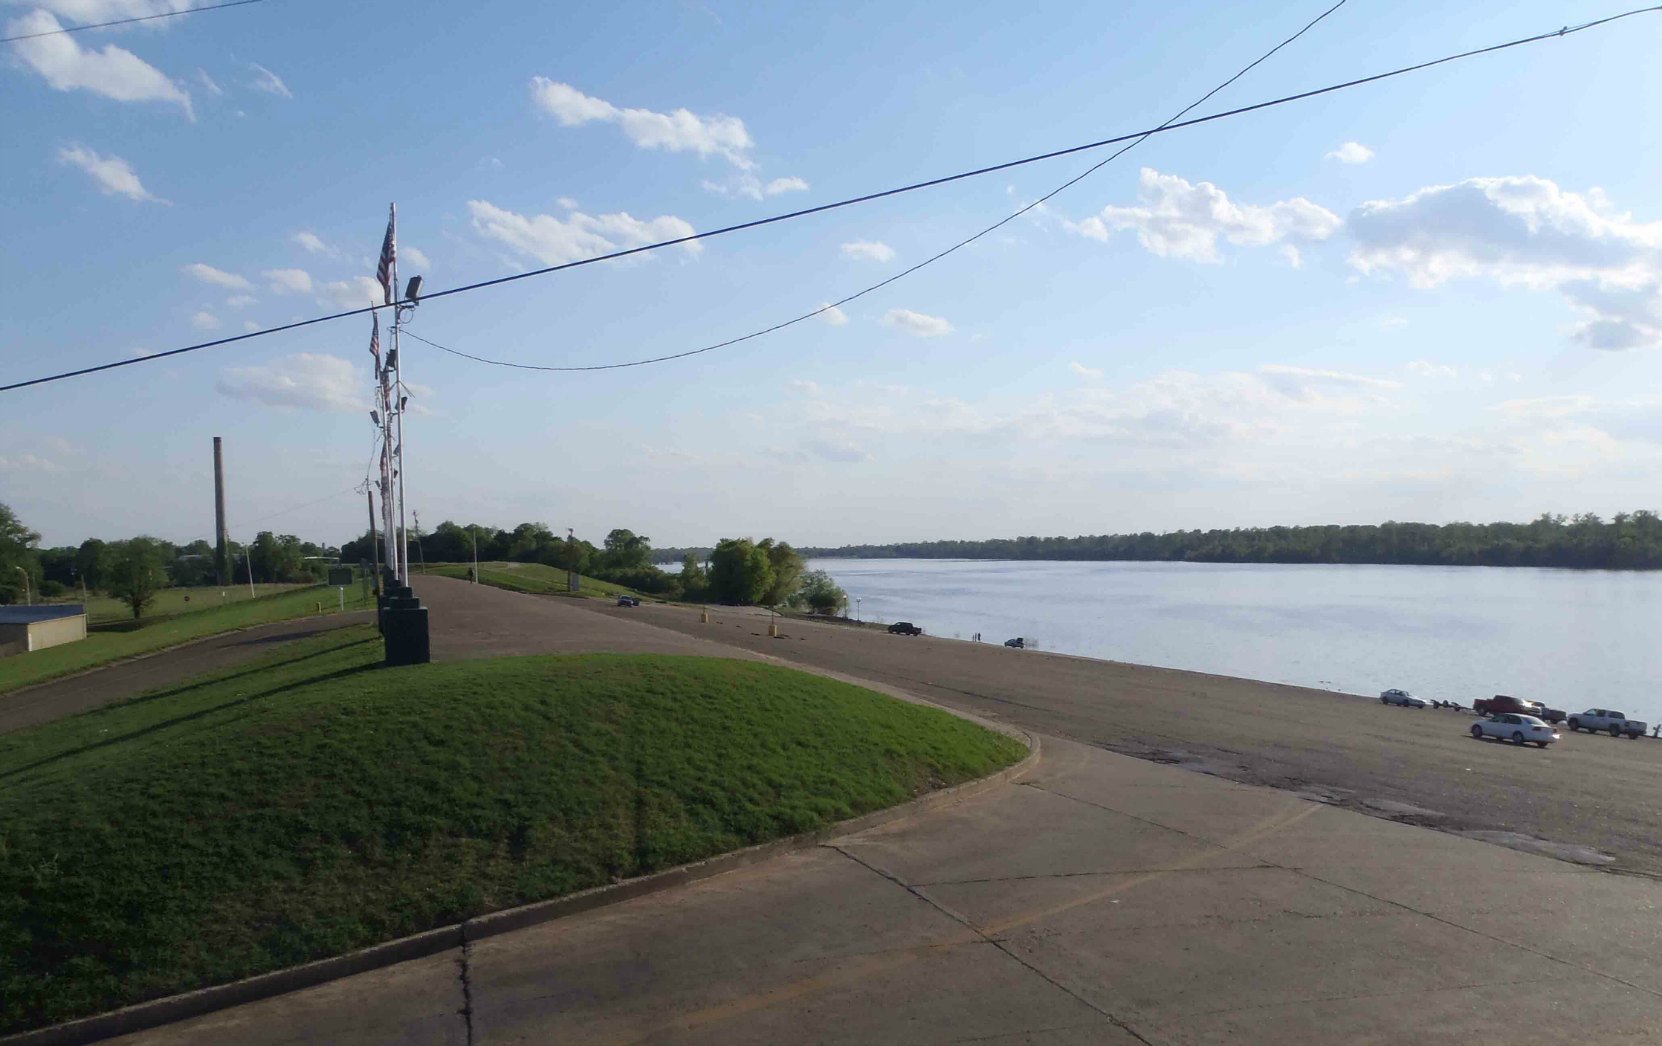 The top of the Mississippi River levee at Greenville, Mississippi. The cars on the right of the photo give an indication of the height of the levee at Greenville.